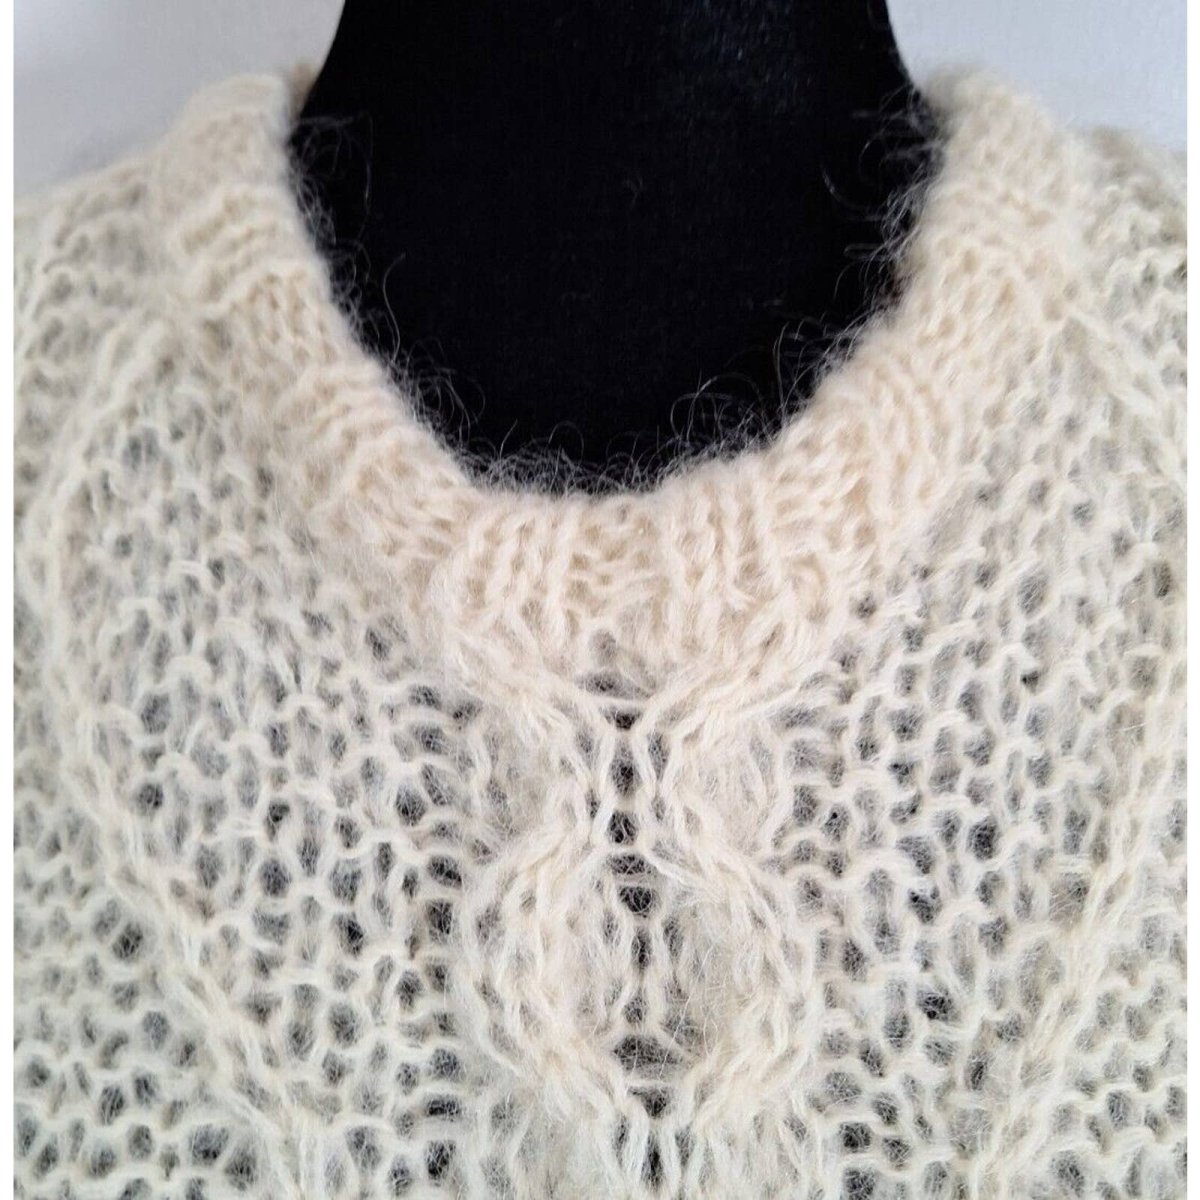 Vintage 80s/90s Cream Loose Knit Italian Wool Blend Sweater Women's Size M - themallvintage The Mall Vintage